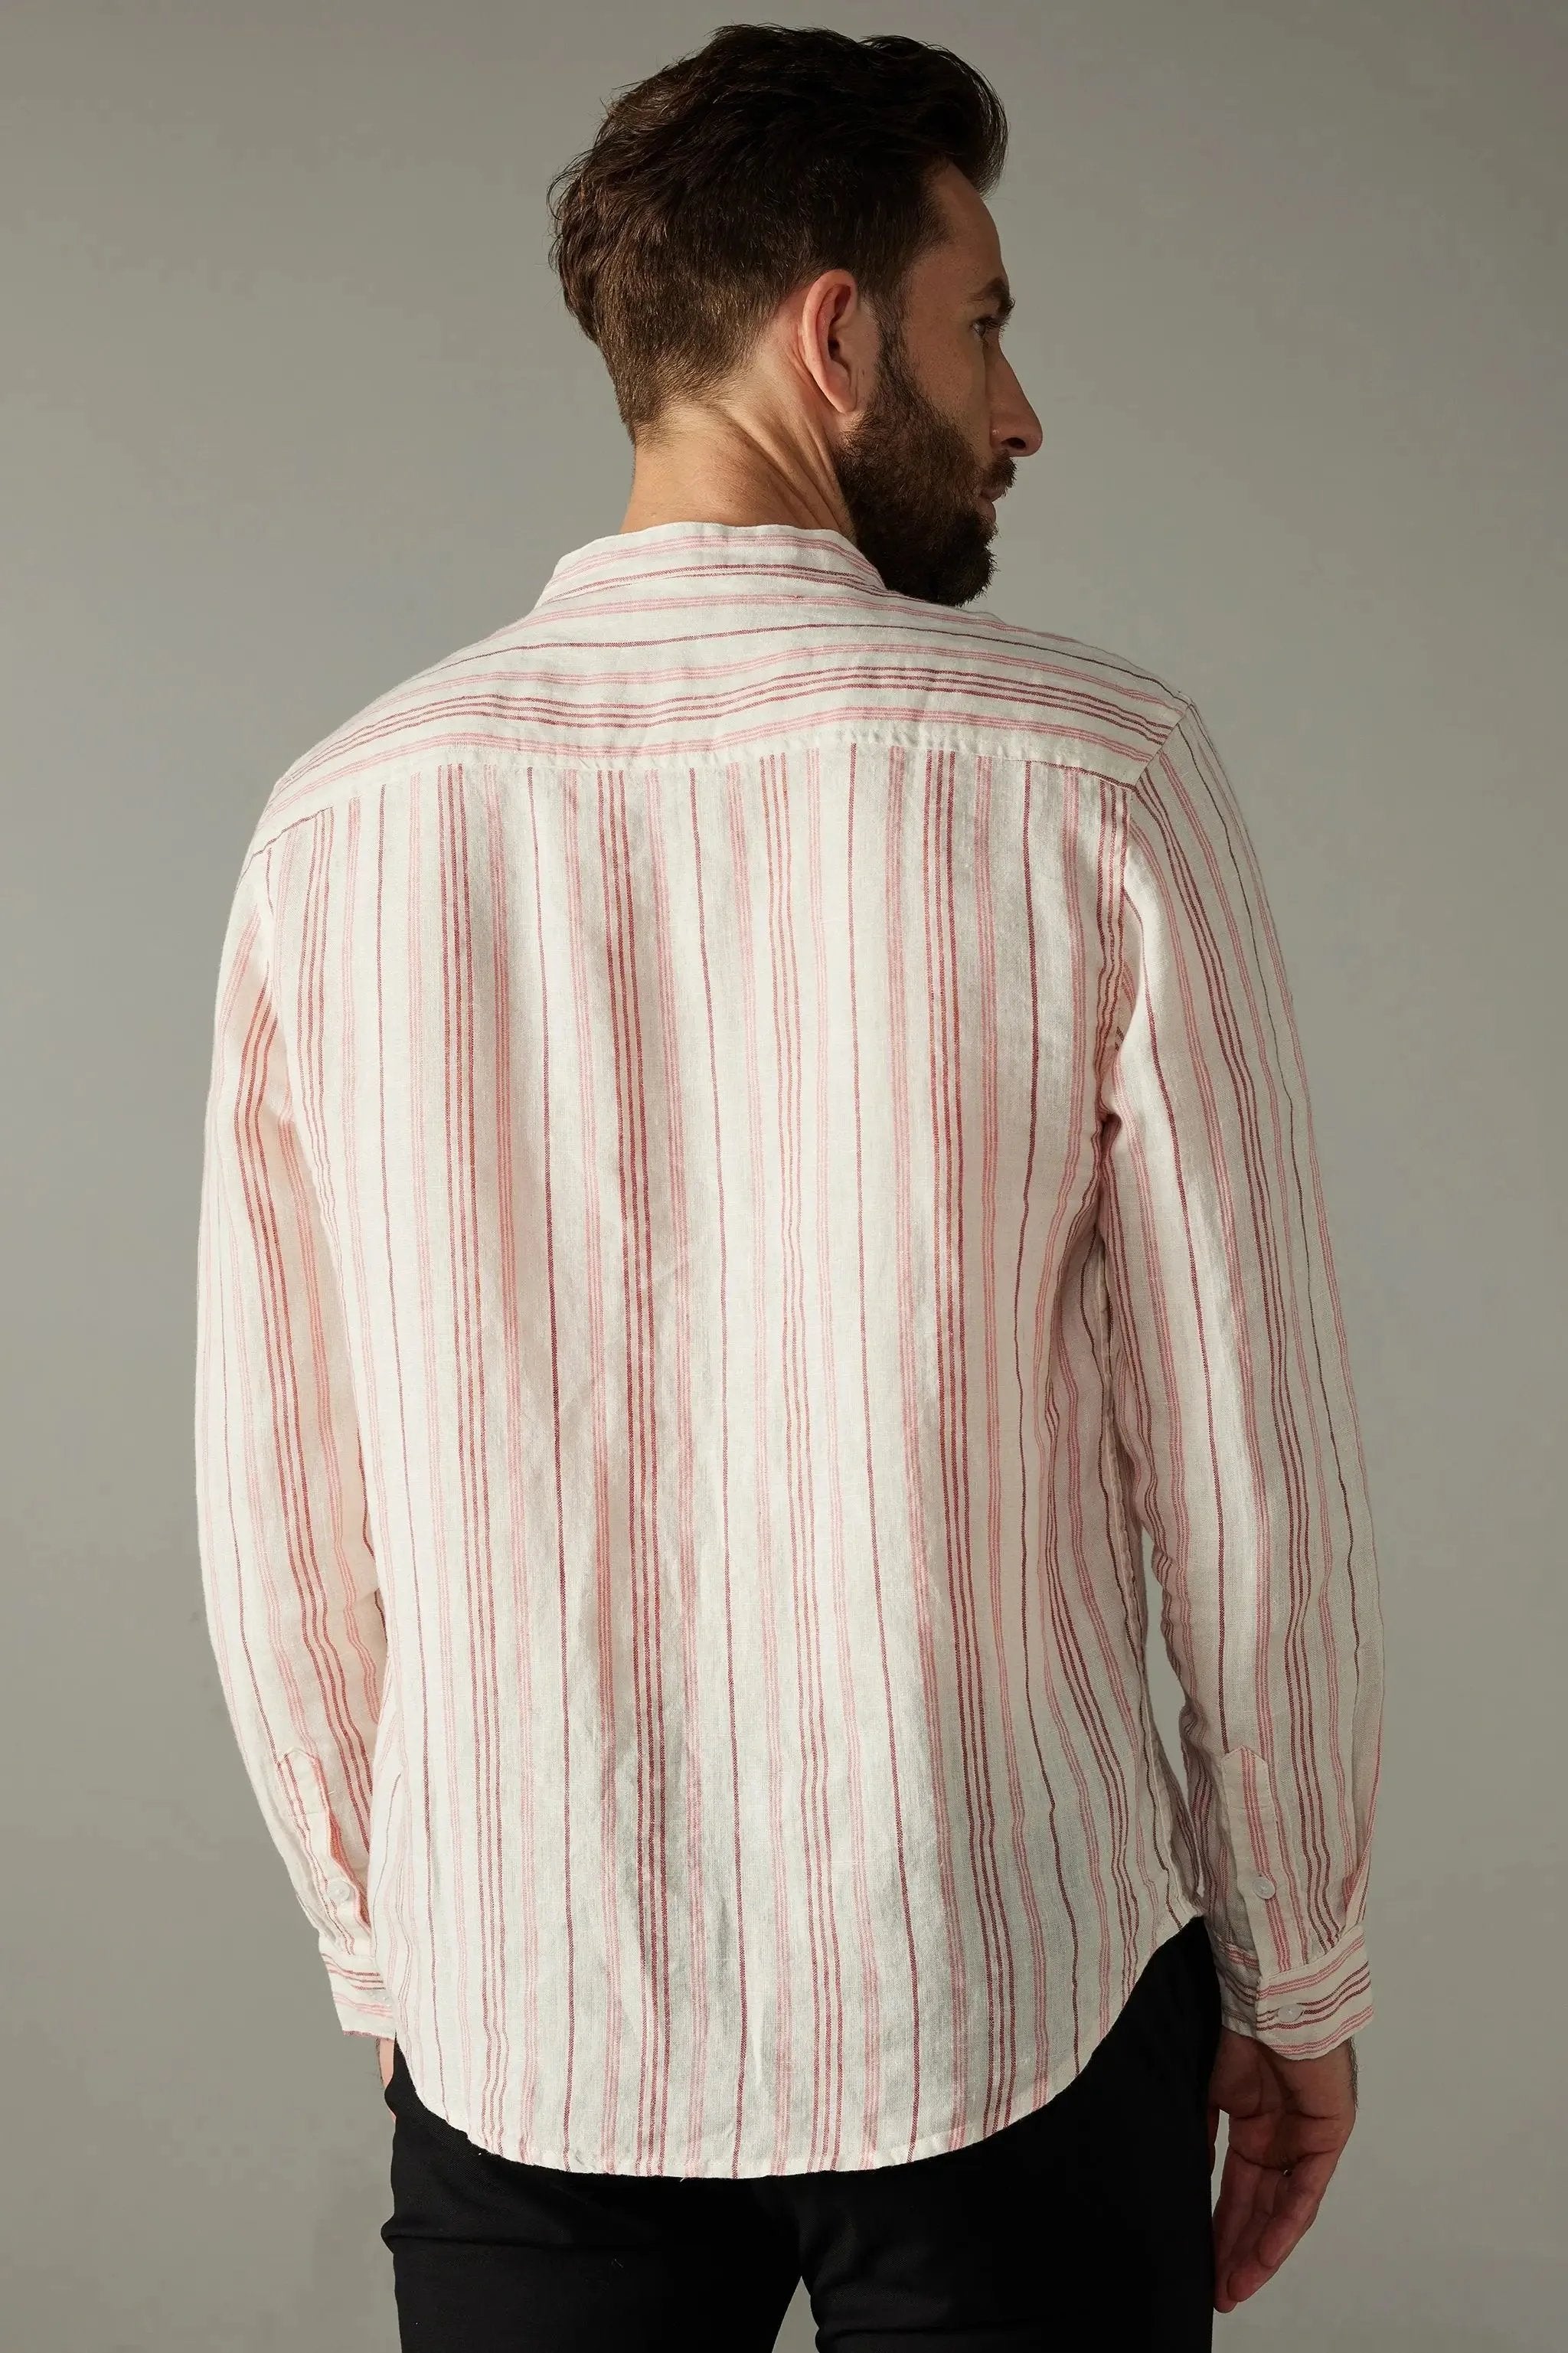 a man with a beard wearing a red and white striped shirt